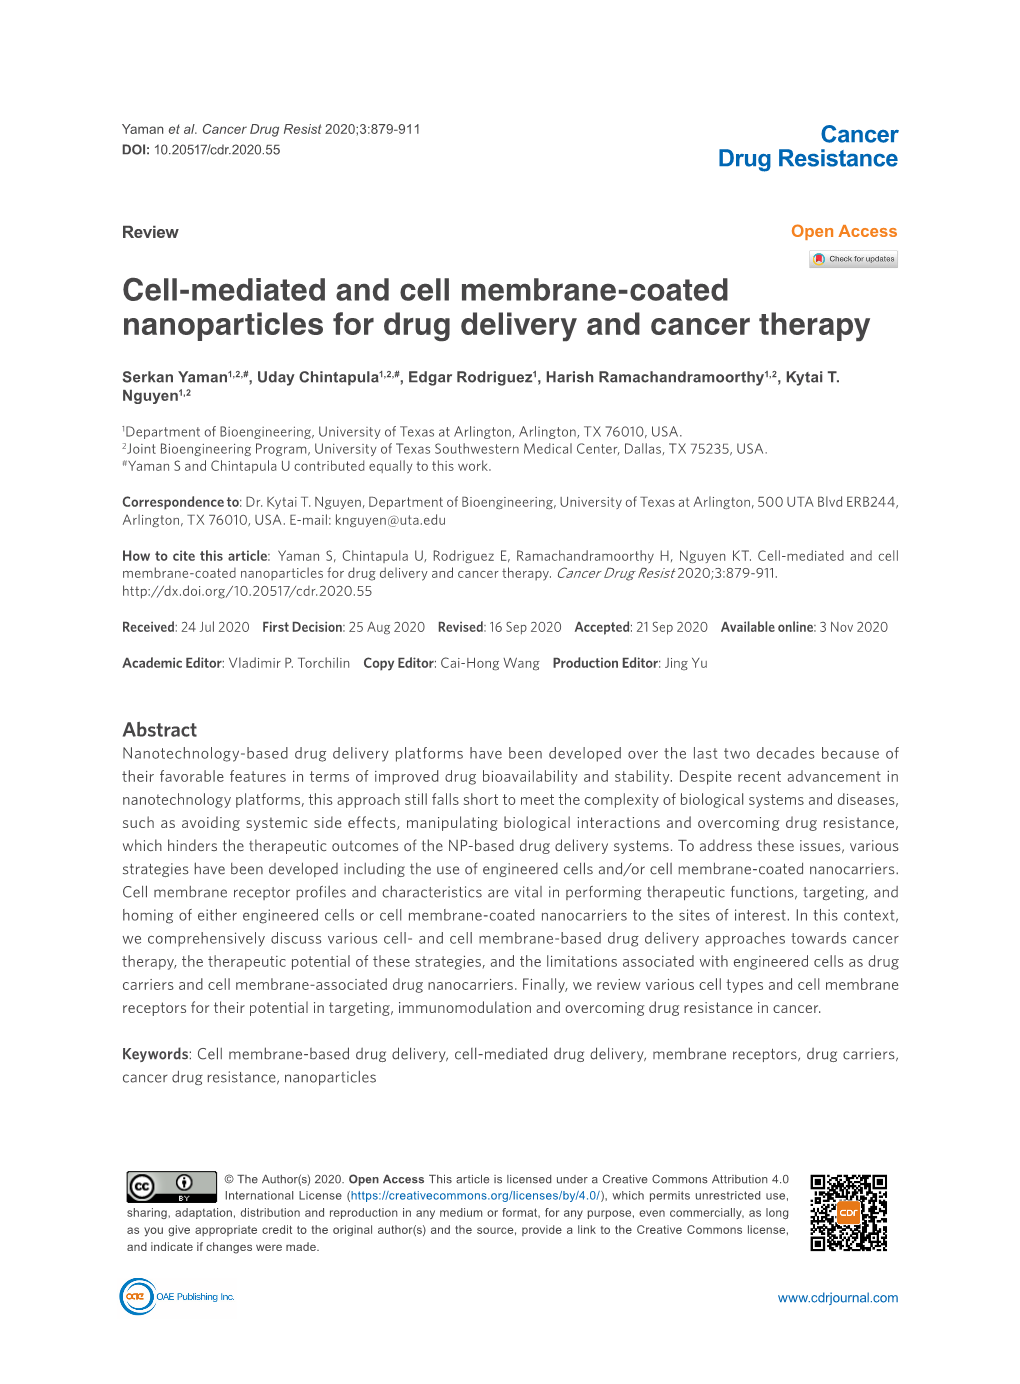 Cell-Mediated and Cell Membrane-Coated Nanoparticles for Drug Delivery and Cancer Therapy